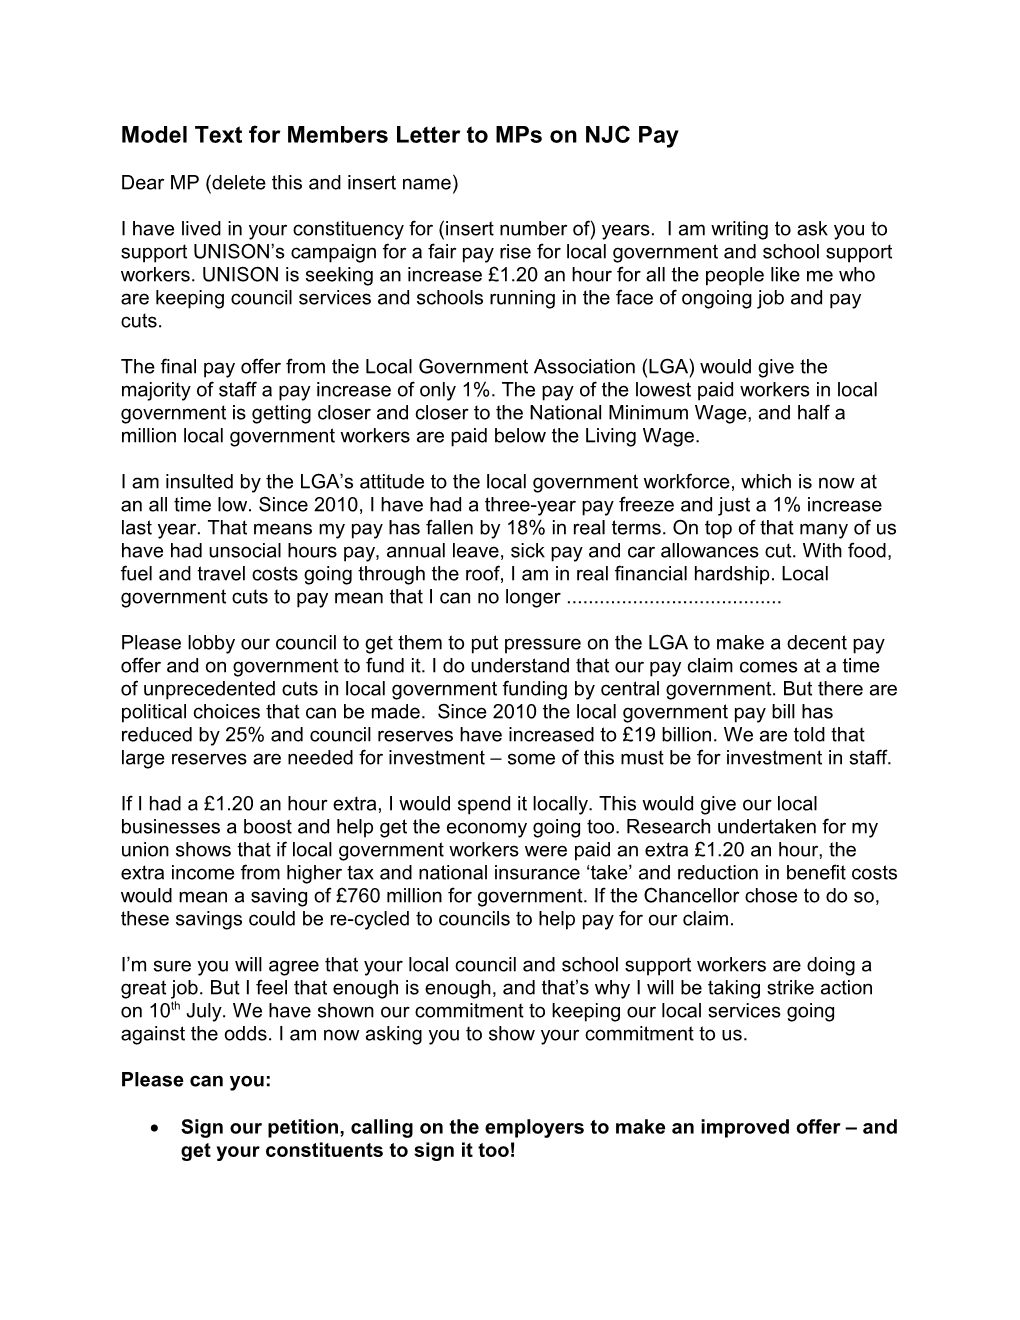 Letter to Mps June 14